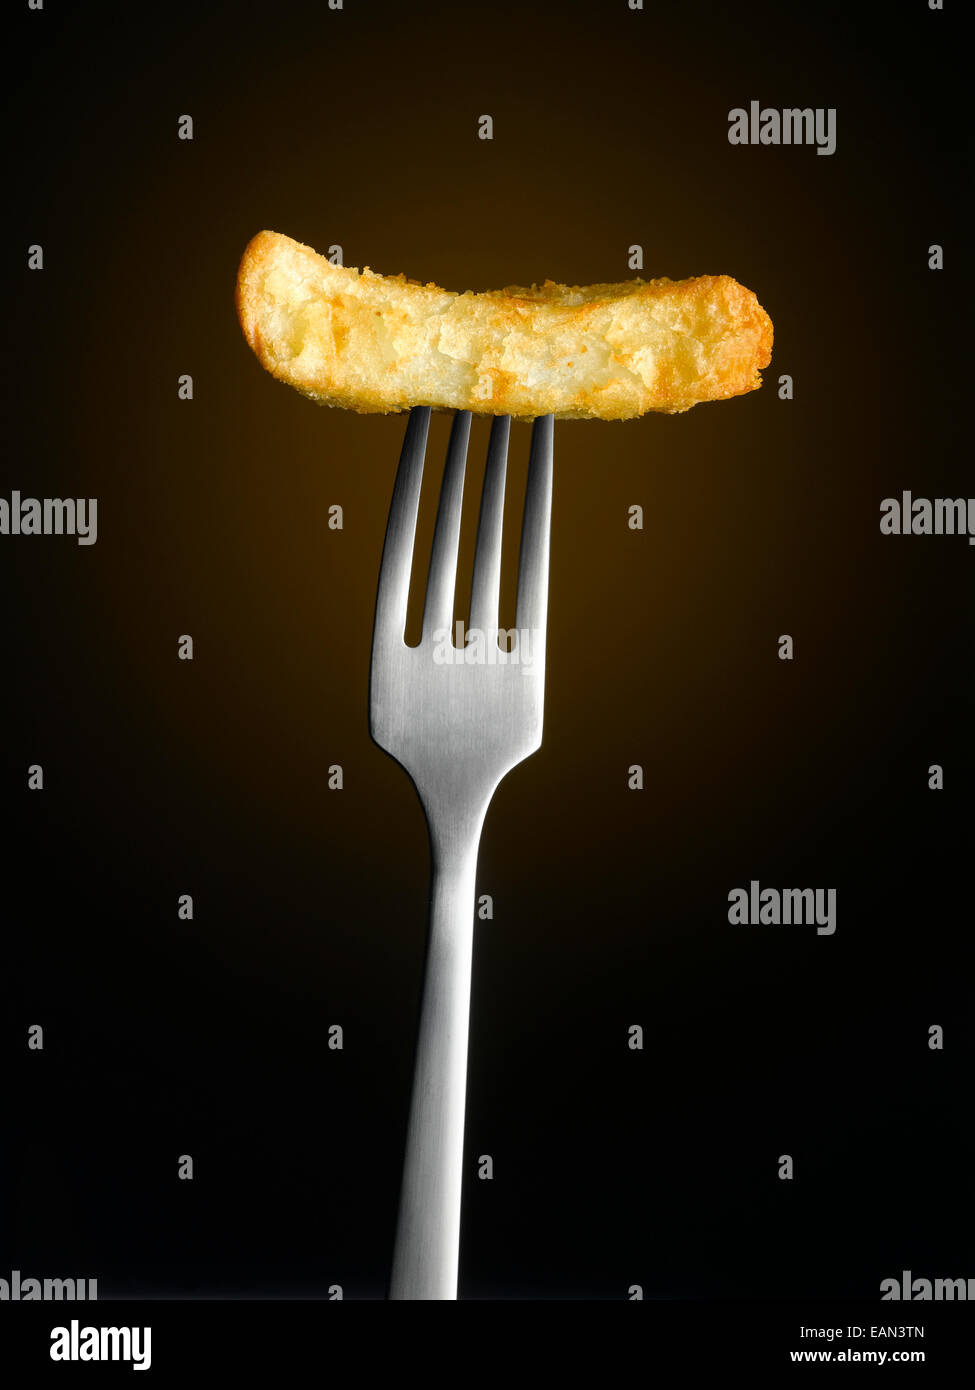 Chip on Fork Stock Photo